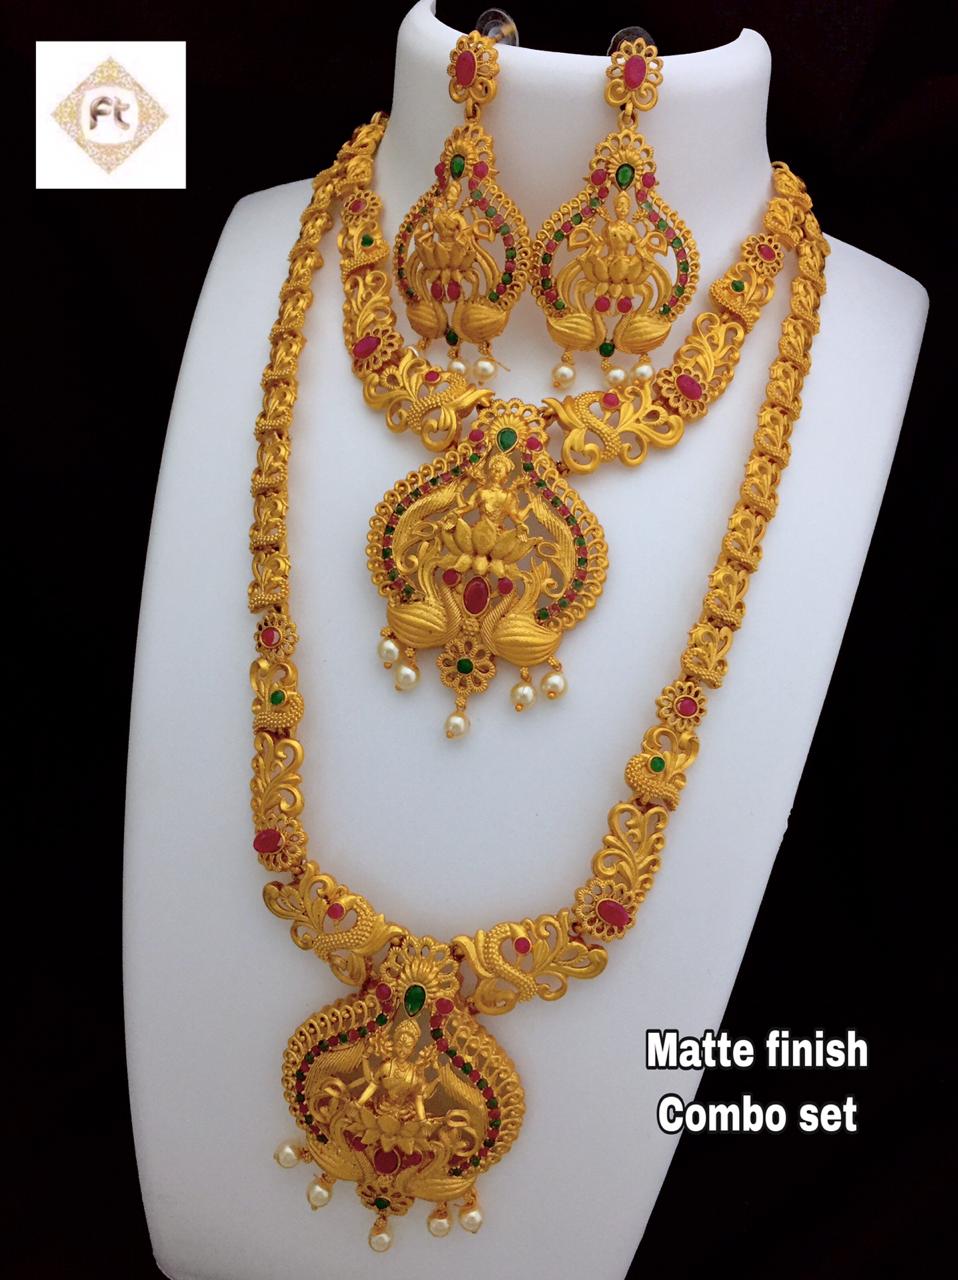 New Collection August 2020 - Indian Jewelry Designs